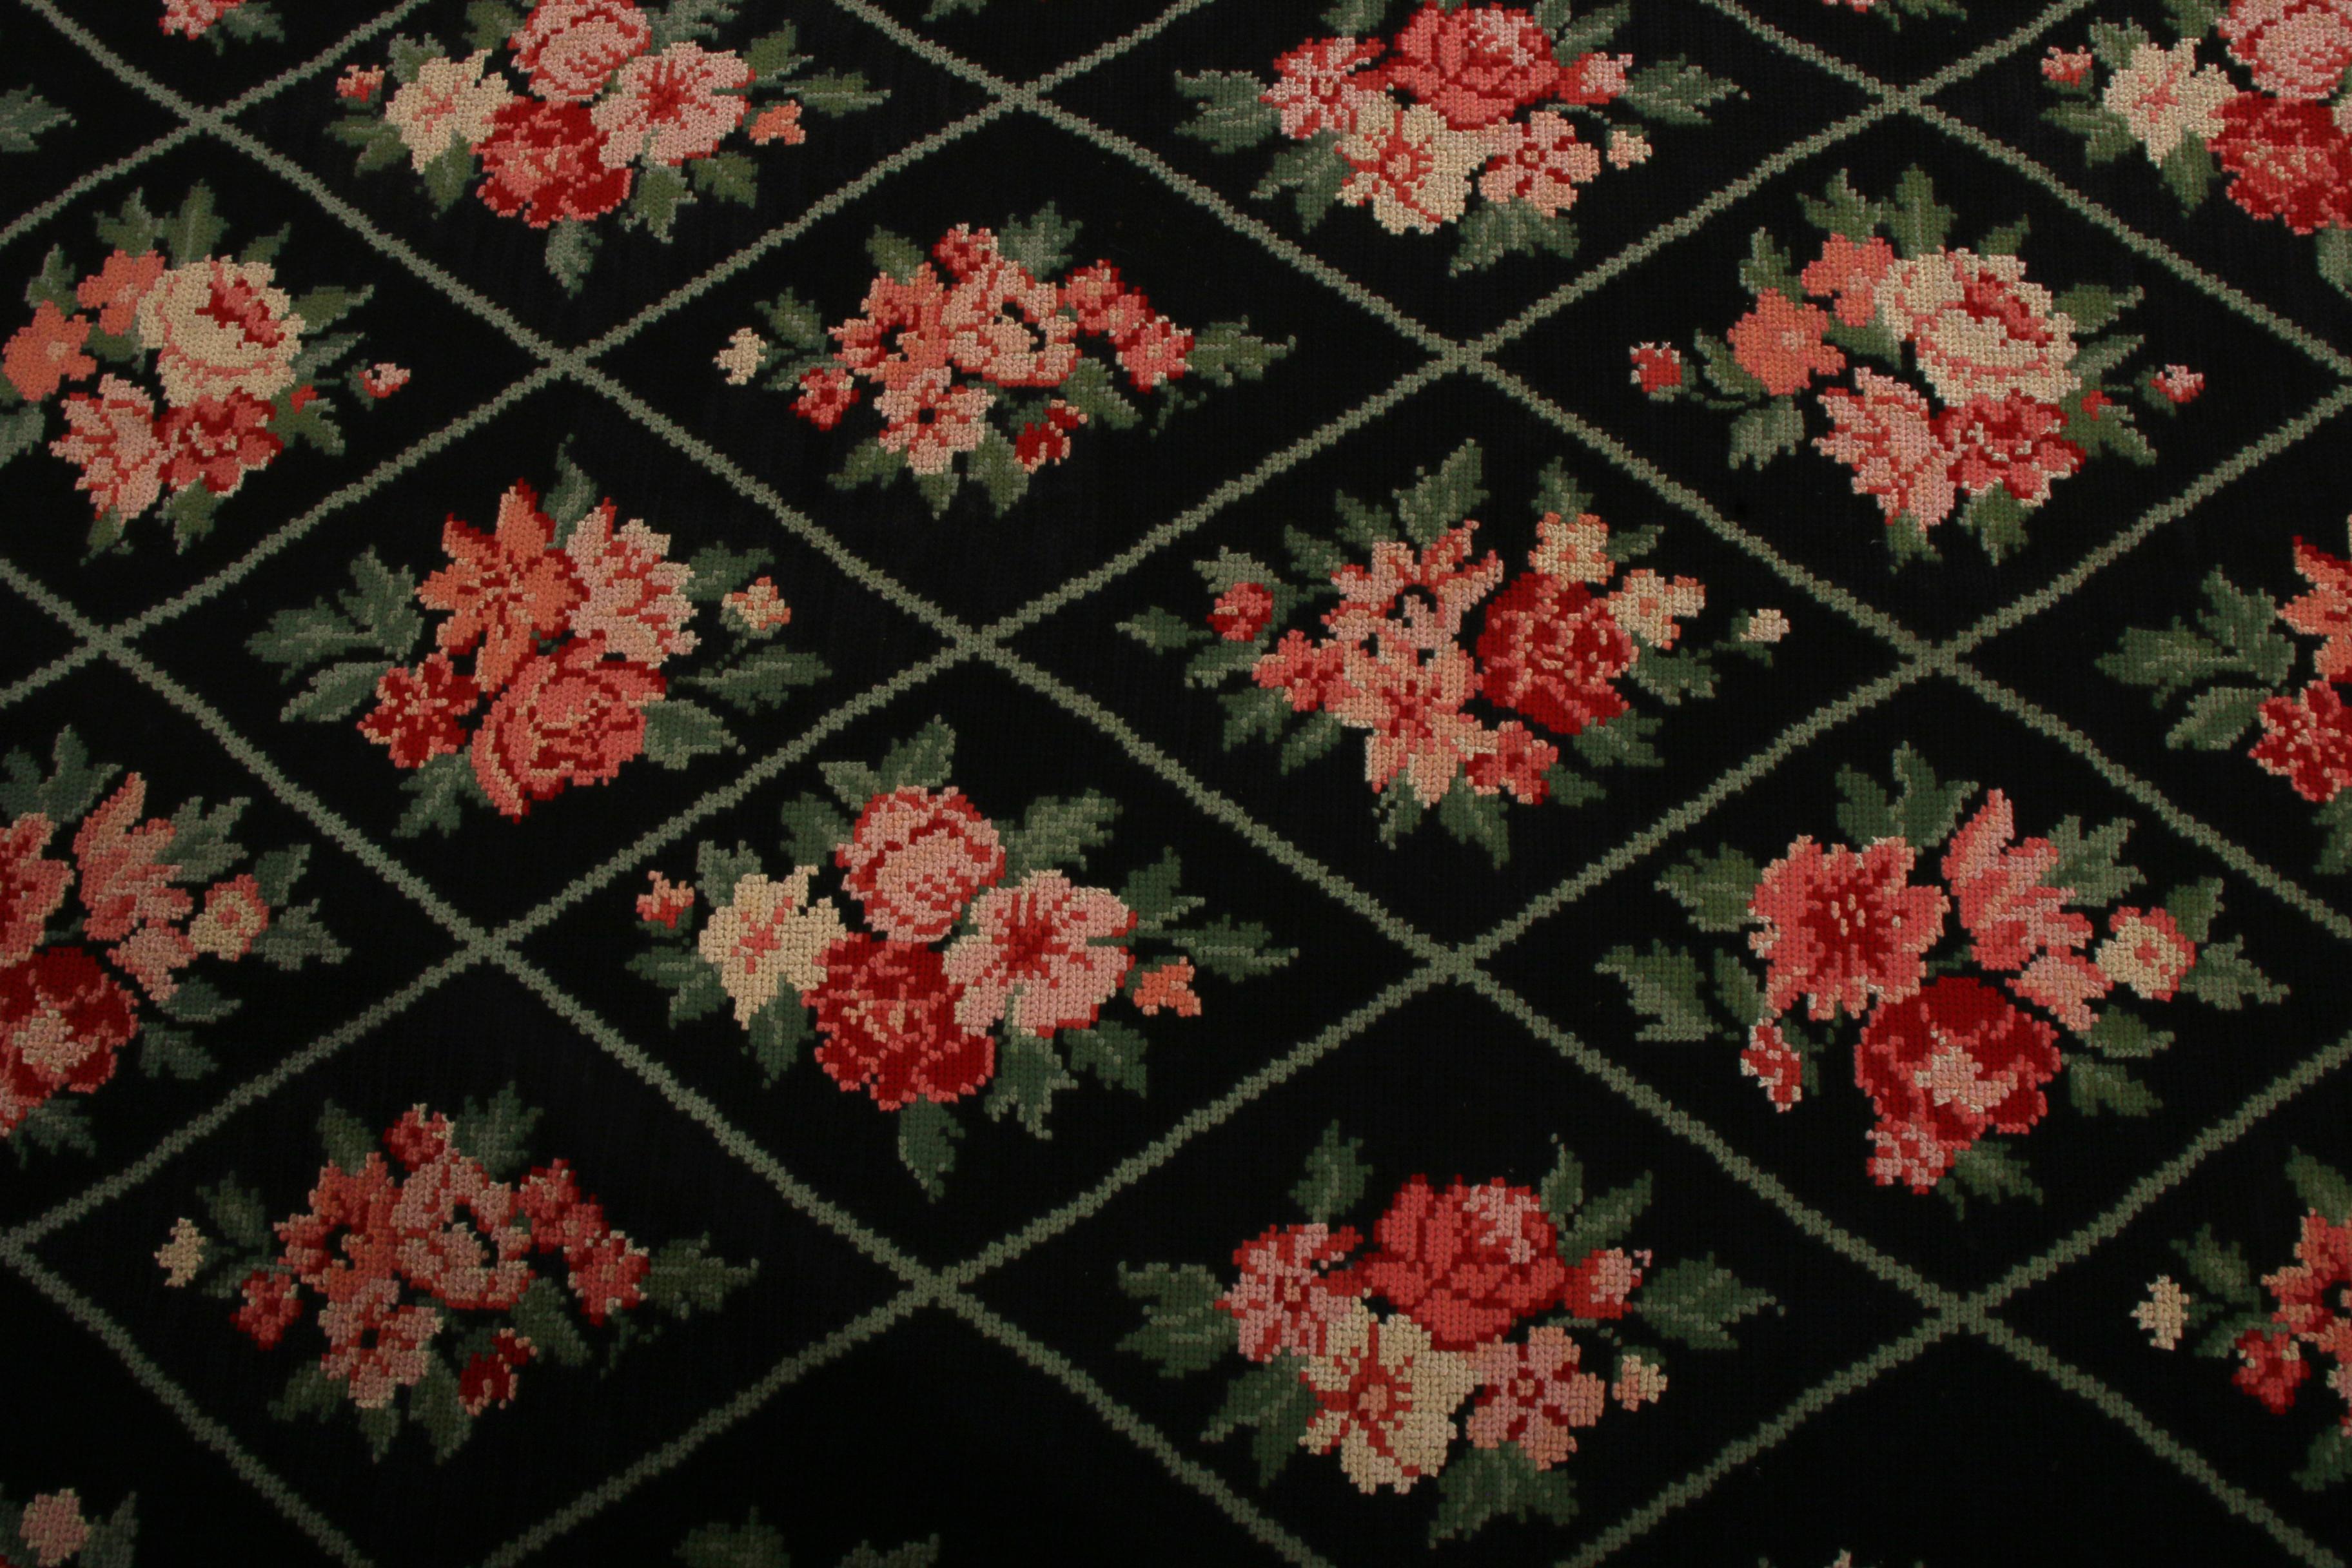 Hand-Woven Contemporary Needlepoint Flat-Weave Wool Black Pink and Green Floral Kilim Rug